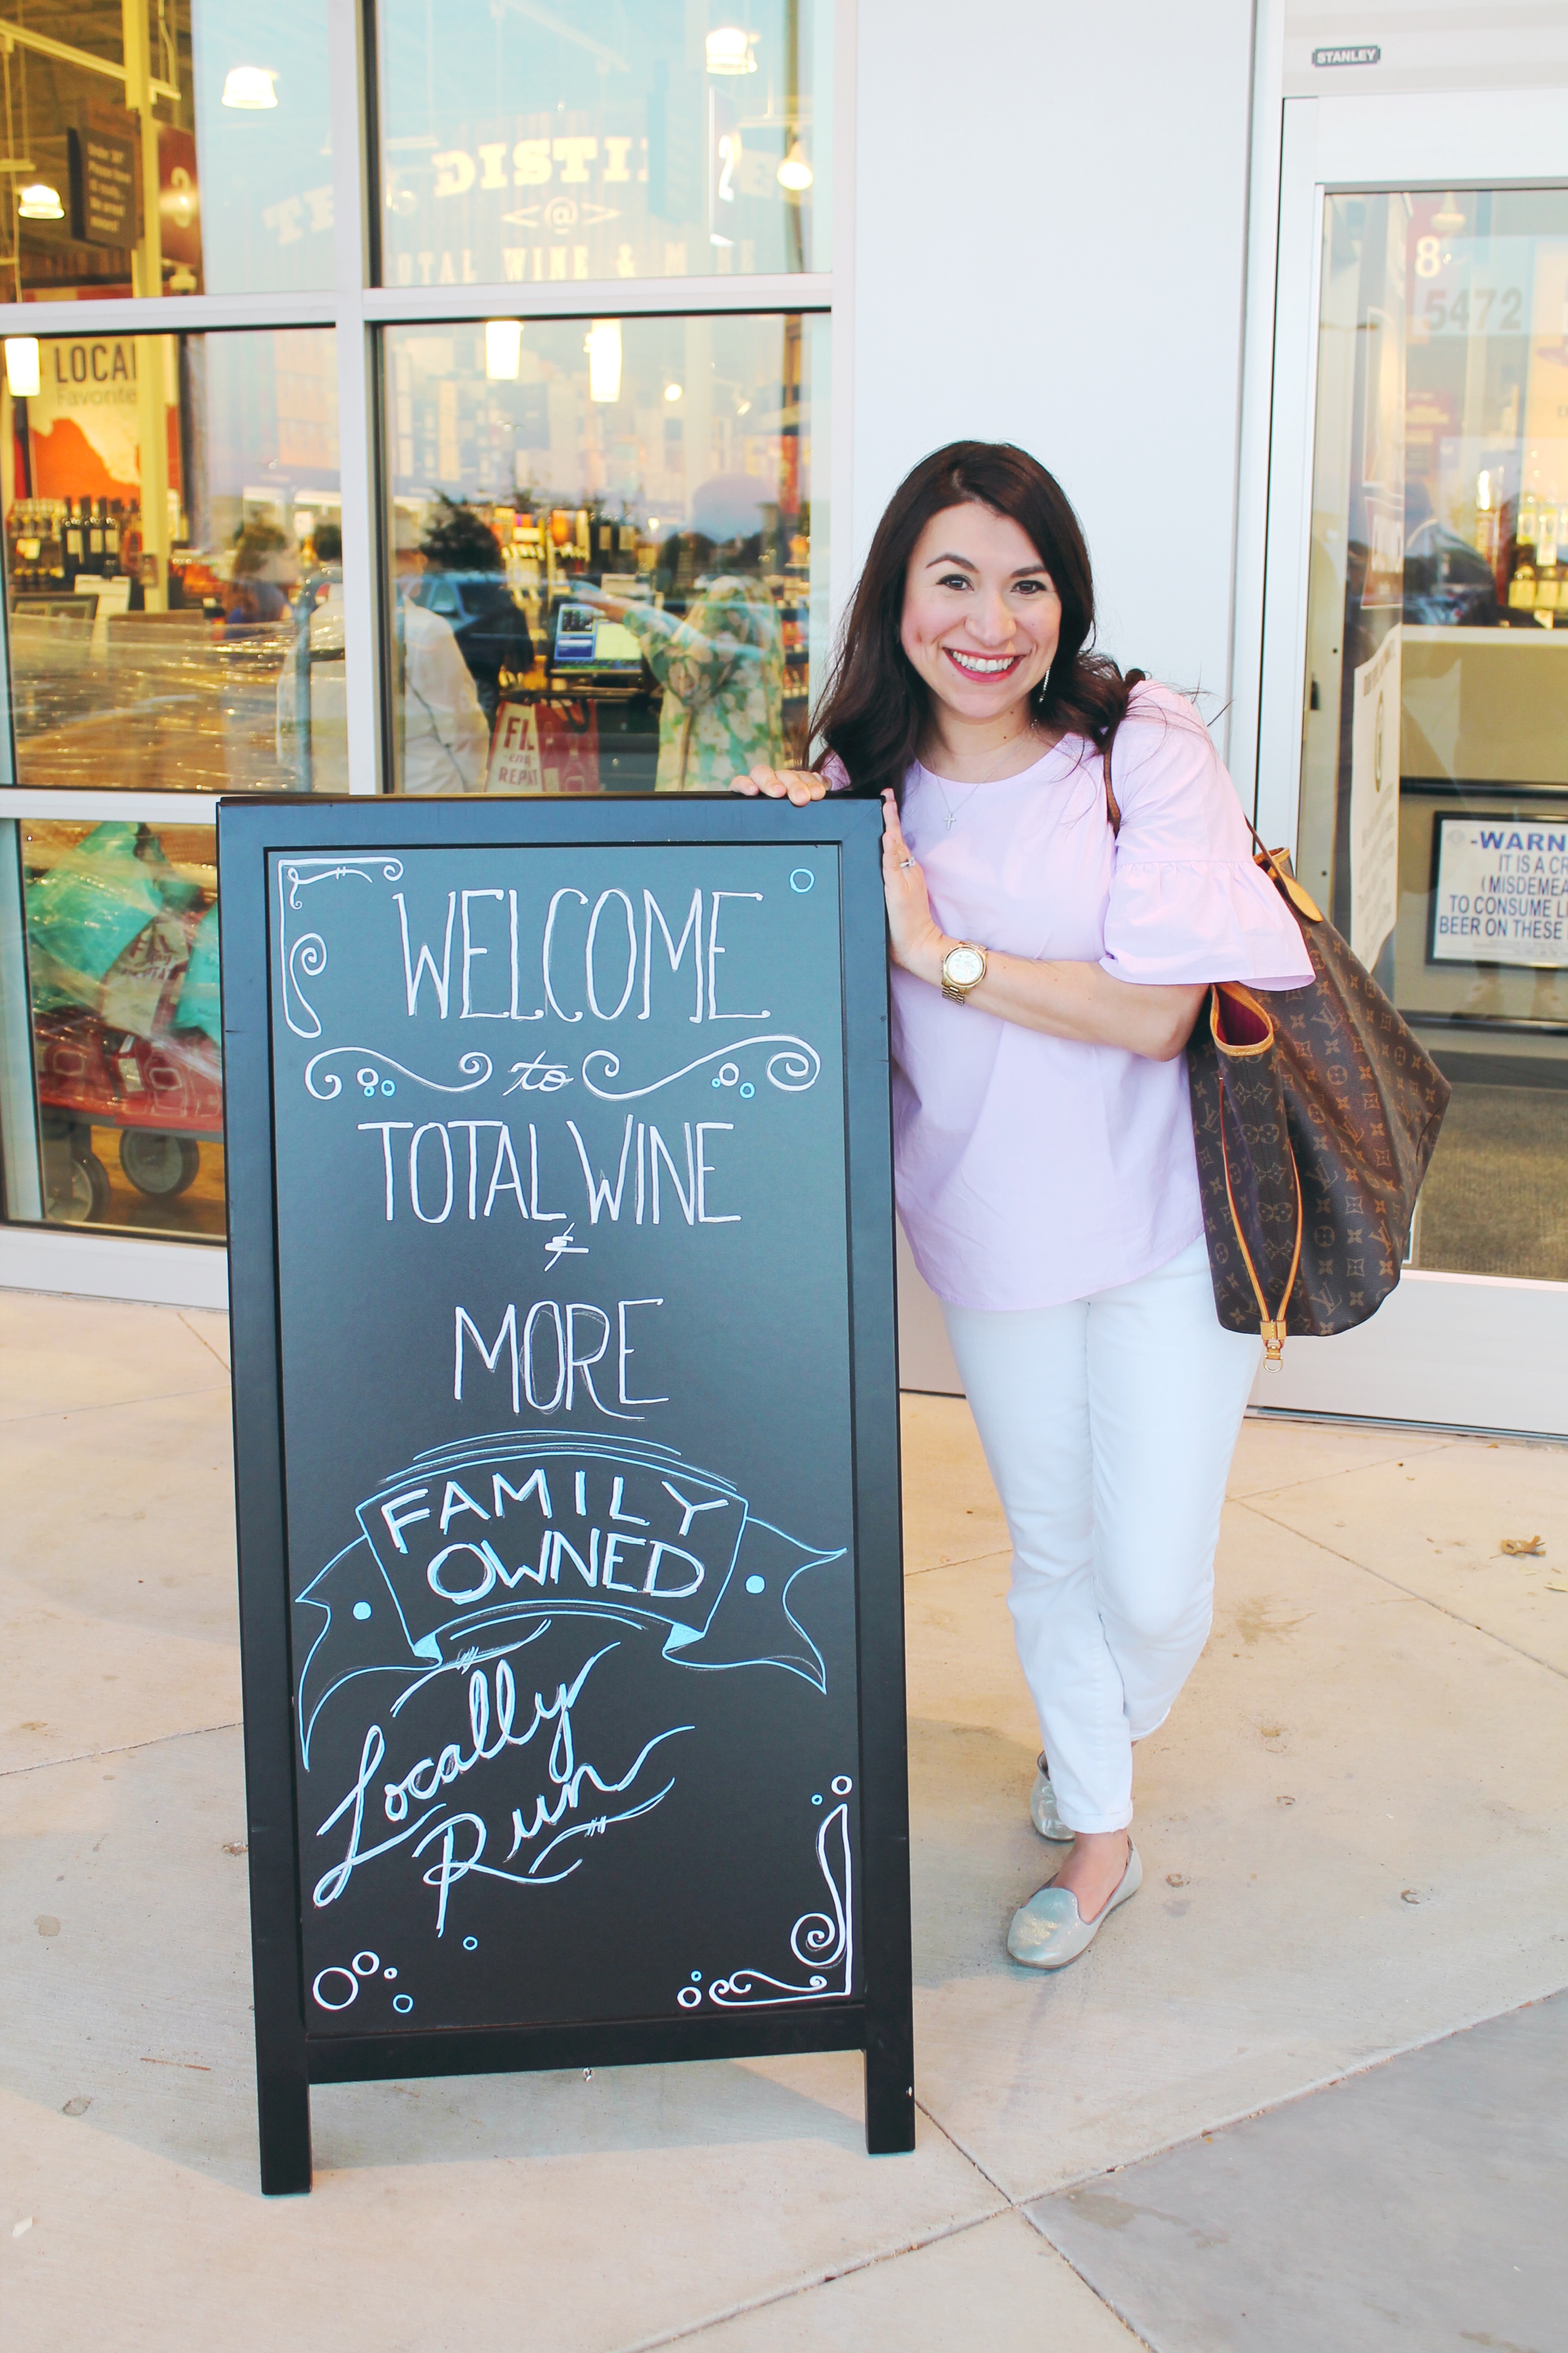 Total Wine & More Superstore Preview Party & 7 of my favorite wines!